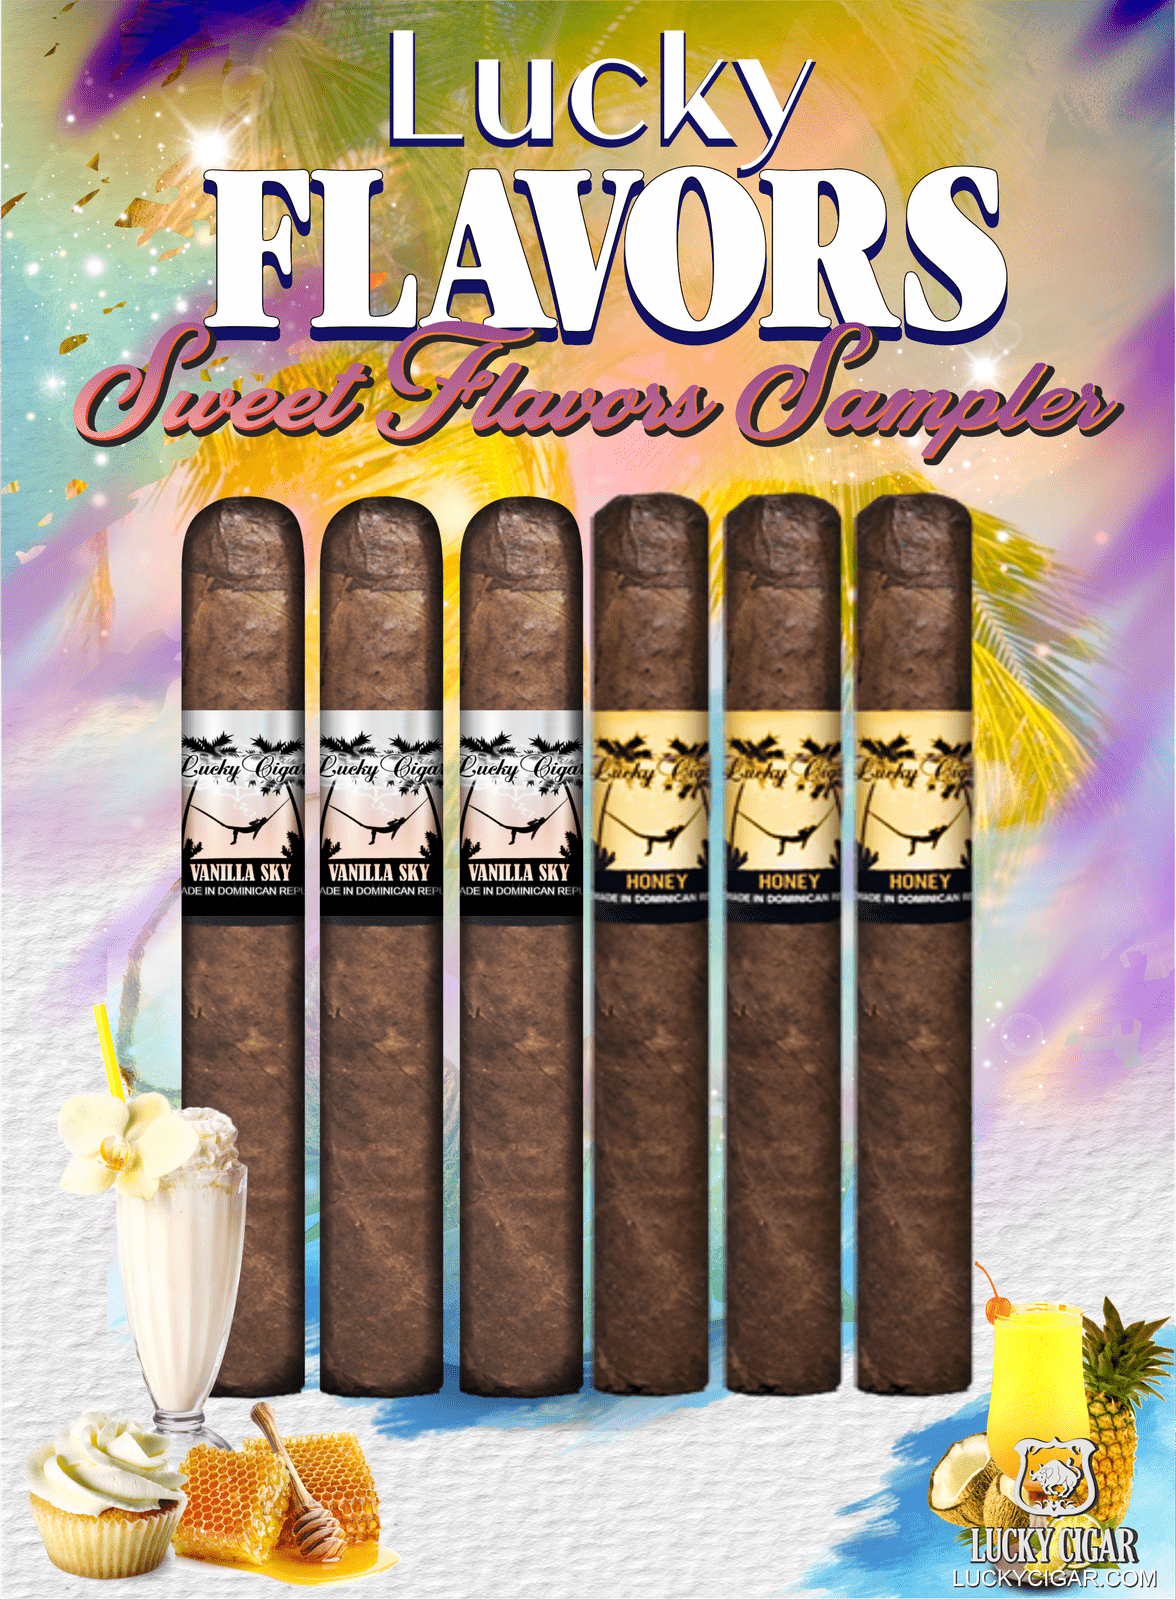 Flavored Cigars: Lucky Flavors 6 Piece Sweets Sampler - Vanilla Sky, Honey